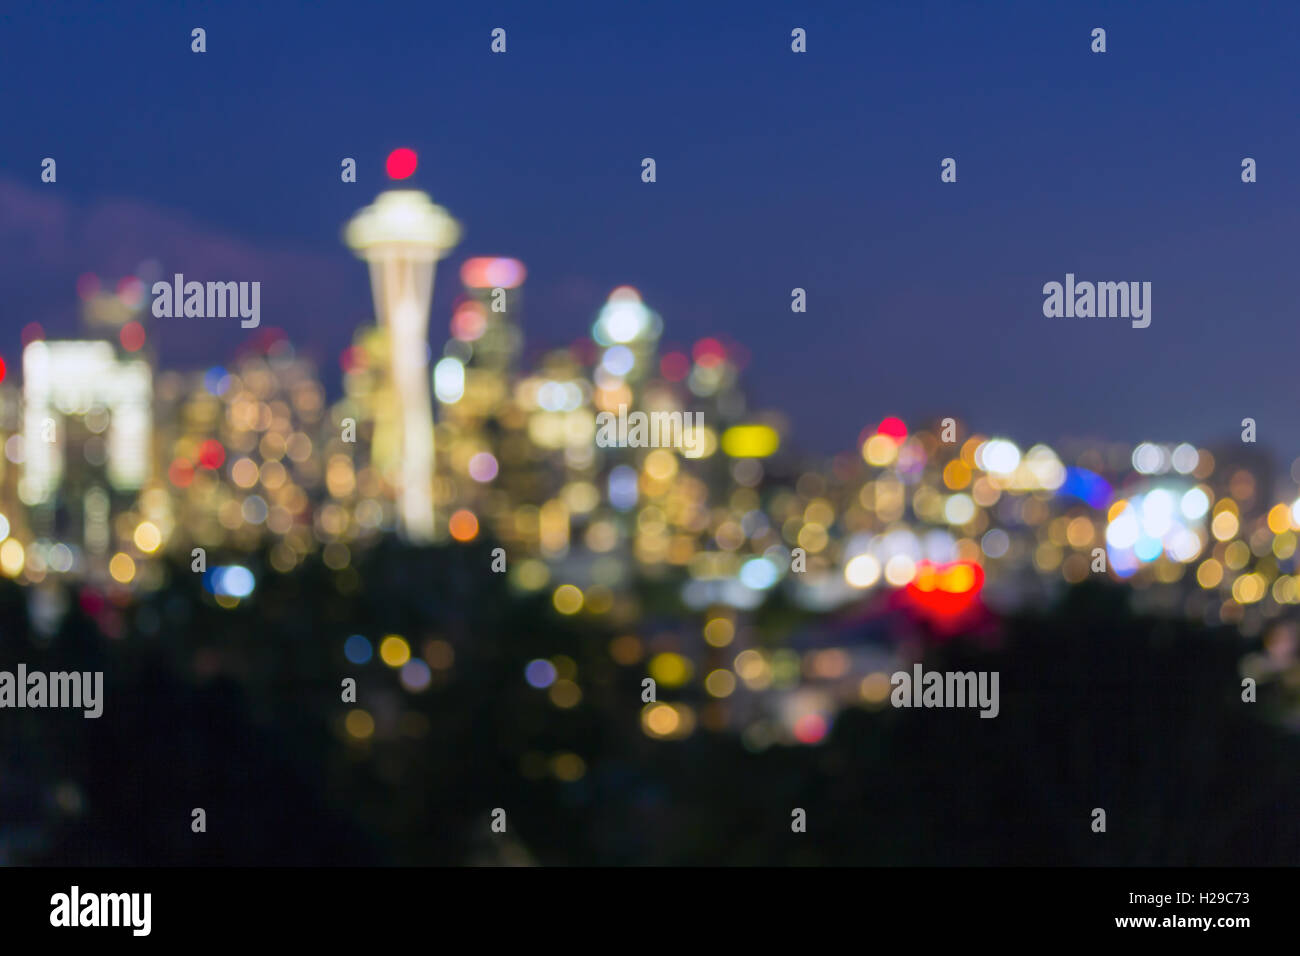 Seattle Washington city downtown skyline at dusk out of focus blurred bokeh city lights Stock Photo